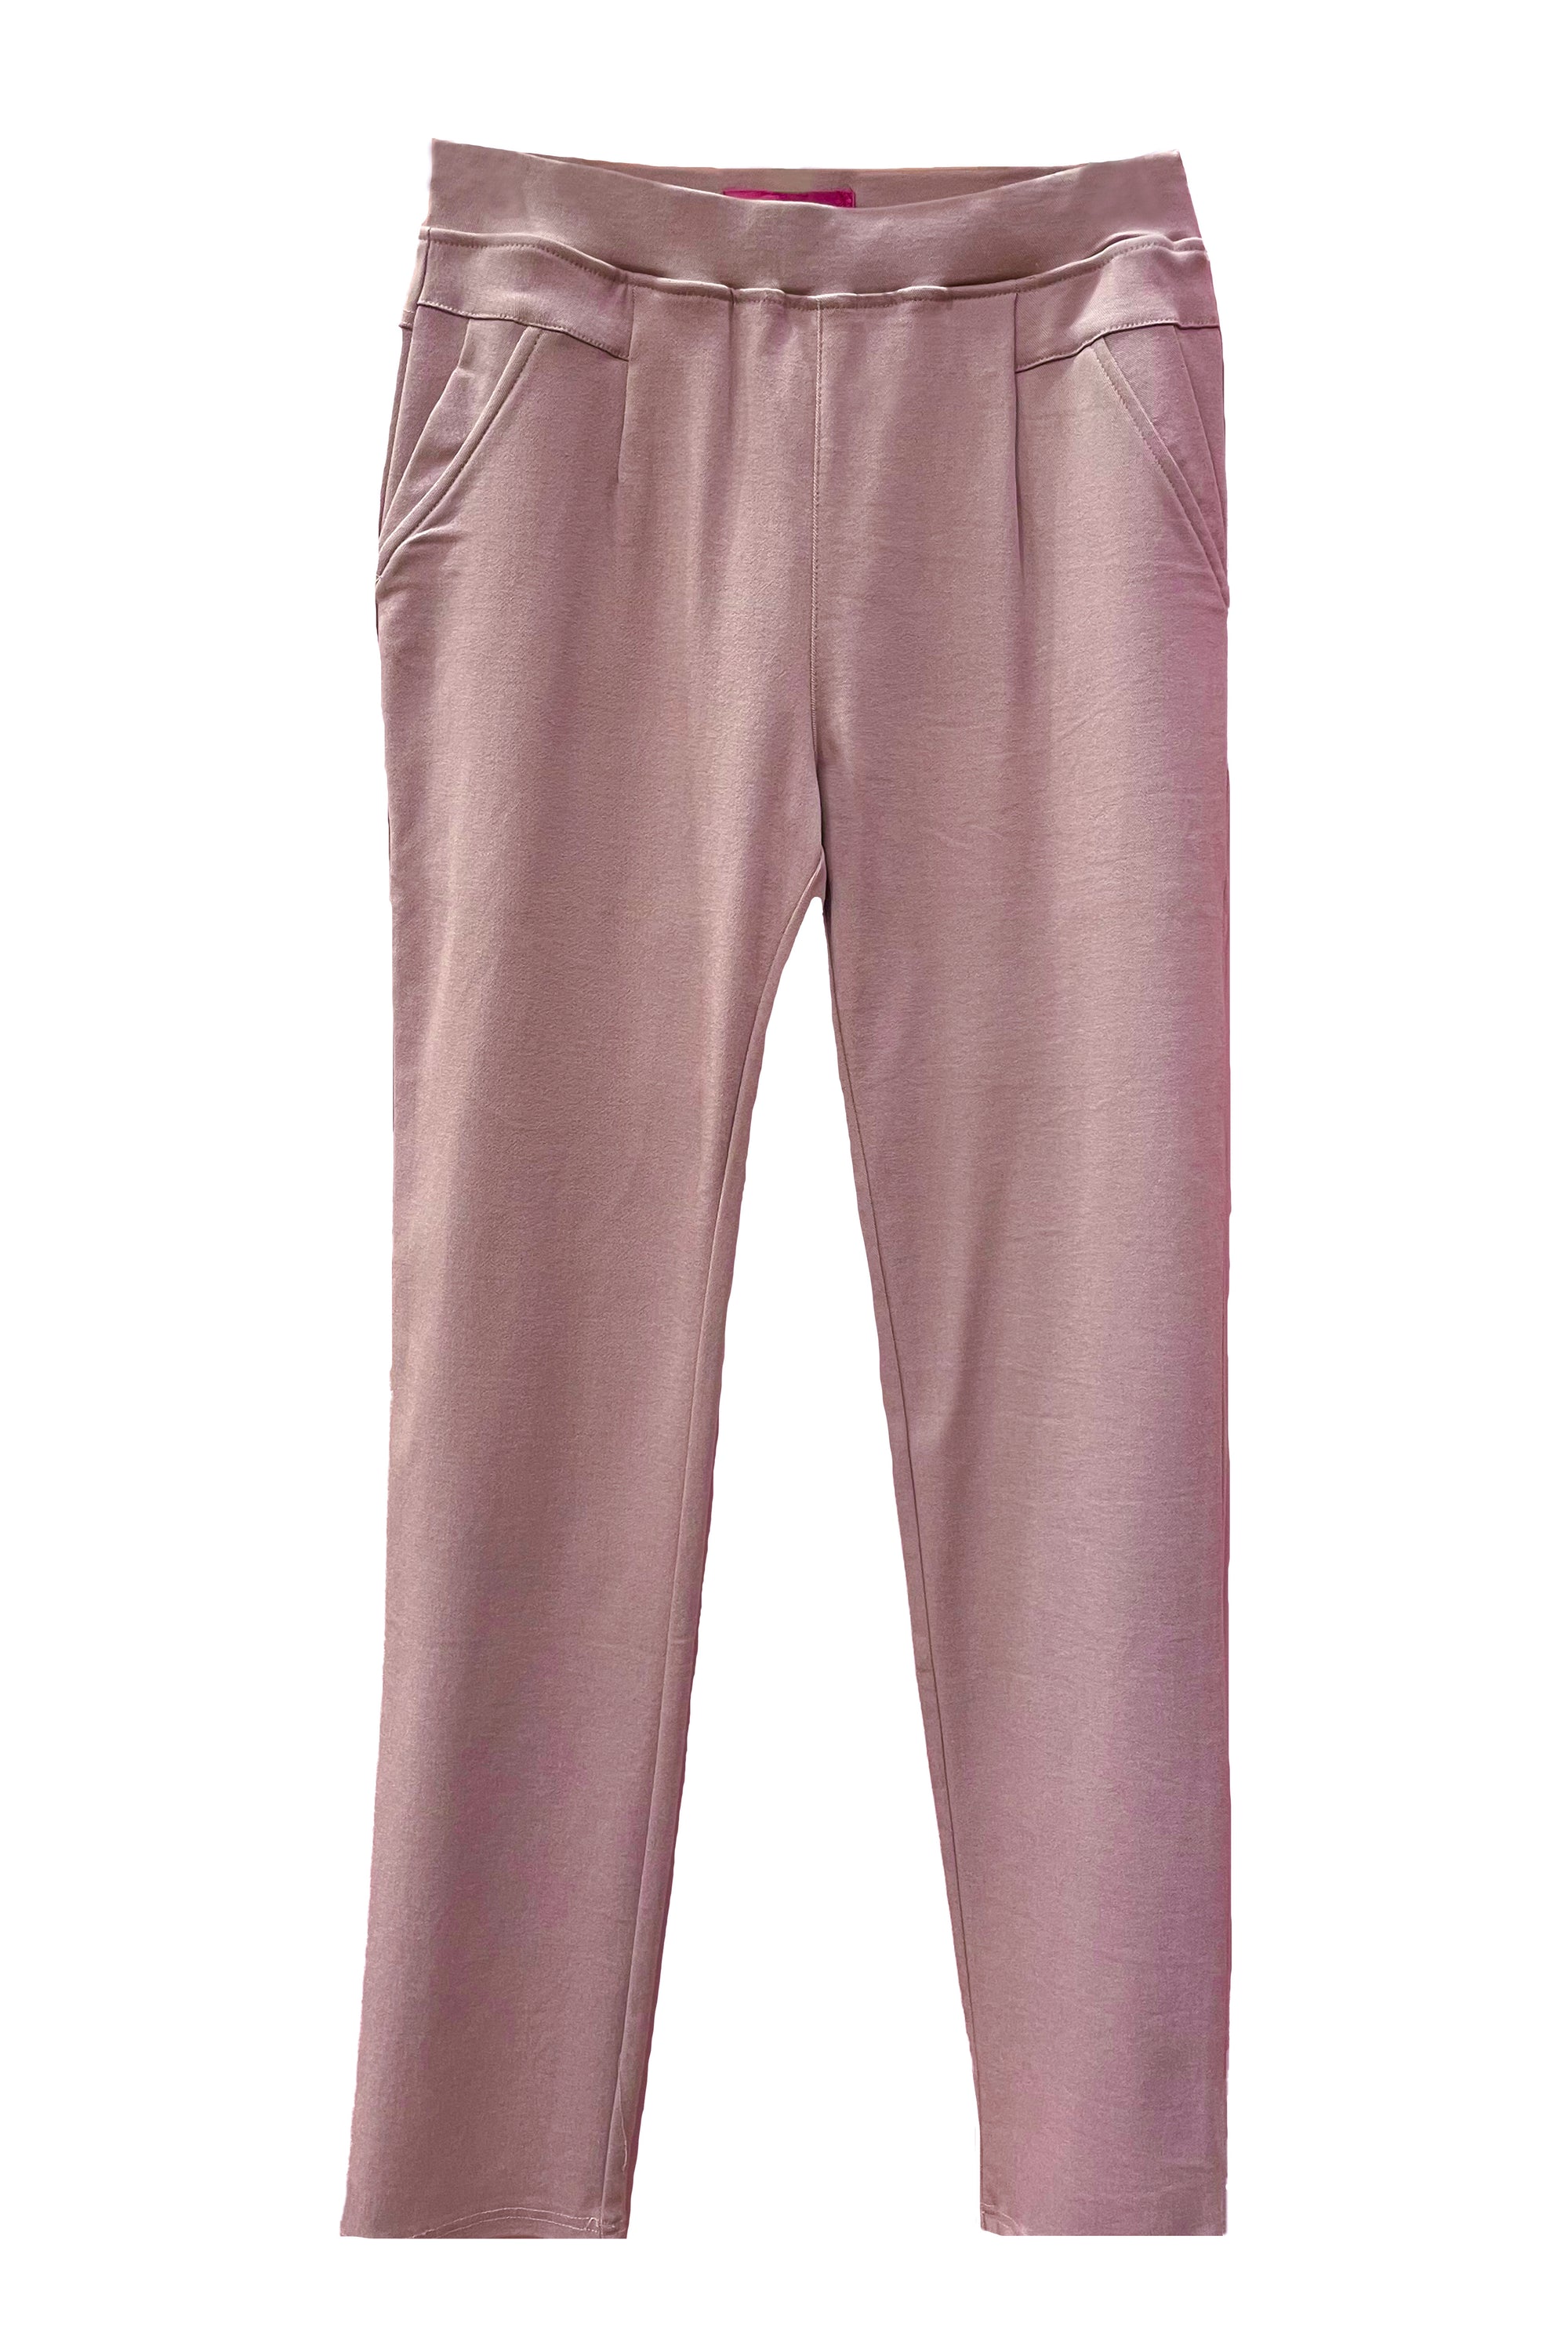 New Pant without Zipper (Thicker Material)- Pink